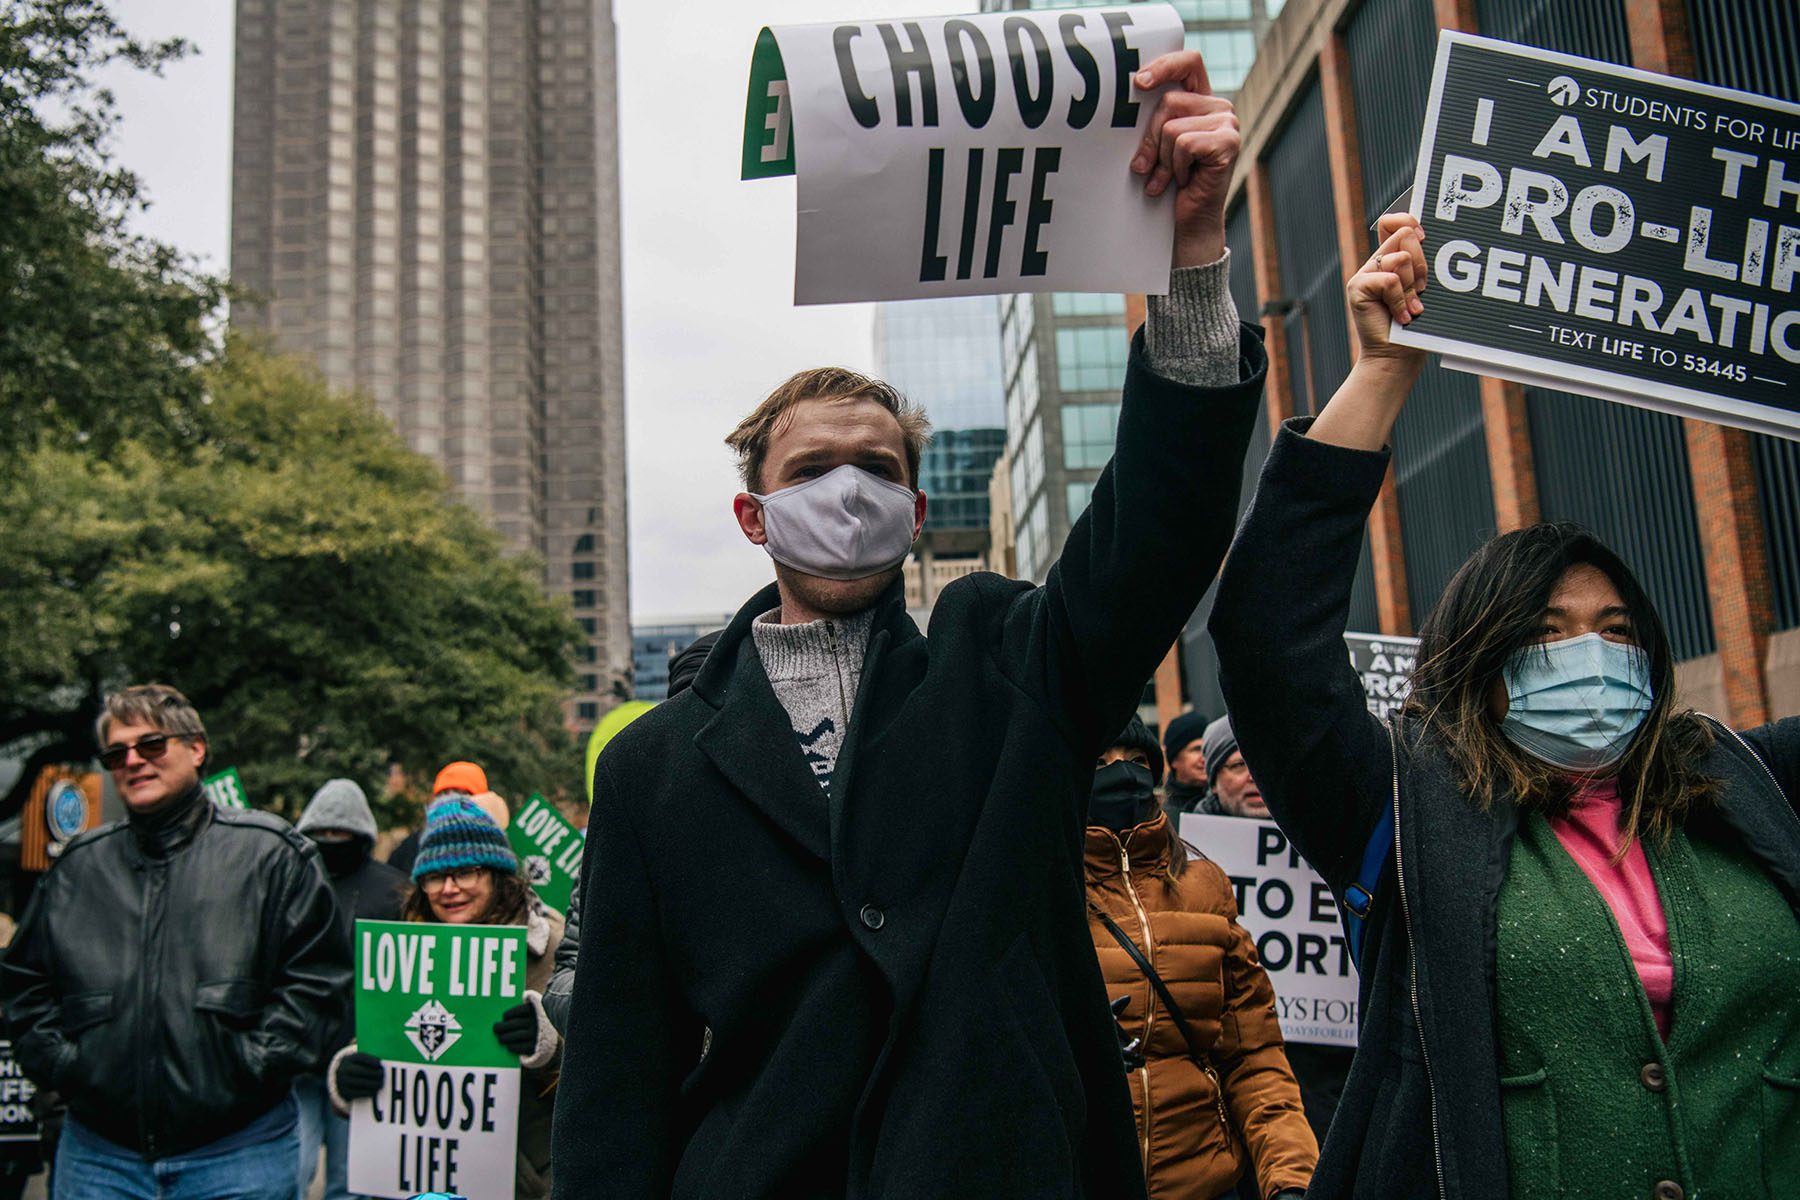 Anti-abortion rights demonstrators march during the "Right To Life" rally in Dallas, Texas in January 2022.